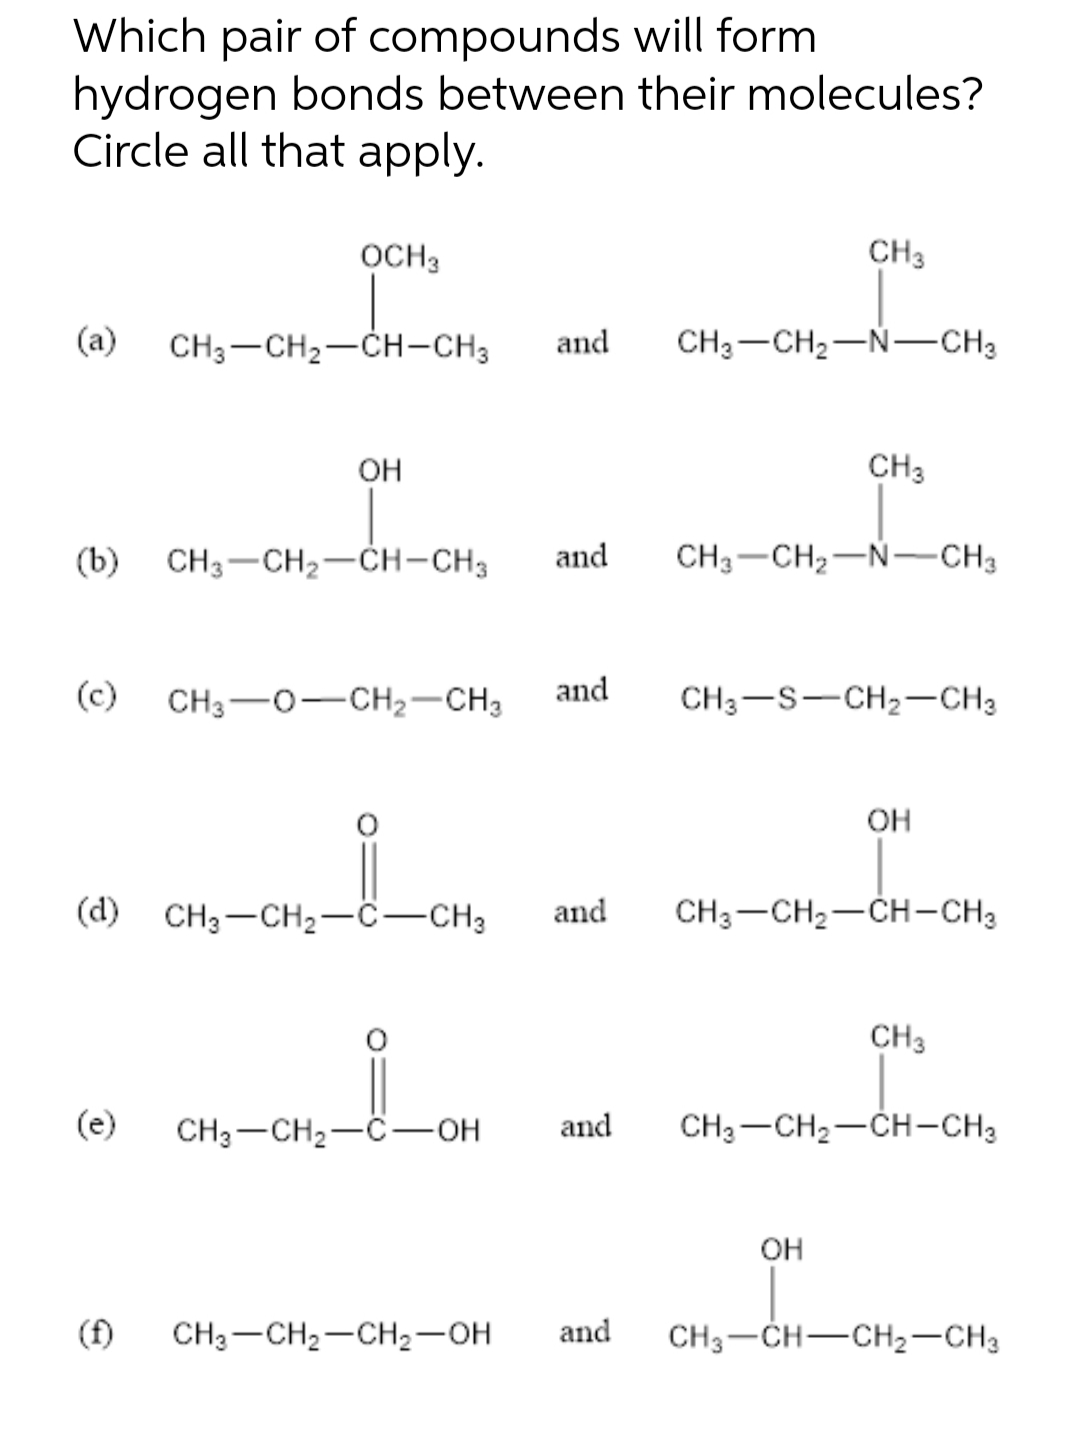 Which pair of compounds will form
hydrogen bonds between their molecules?
Circle all that apply.
OCH 3
(a) CH3-CH₂-CH-CH3 and CH3-CH₂-N-CH3
(c)
OH
(b) CH3-CH₂-CH-CH3 and CH3 CH₂-N-CH3
CH3 O-CH₂-CH3
0₁-0₁-i_
(d) CH3-CH₂-C-CH3
CH3-CH₂-C-OH
CH3 CH₂-CH₂-OH
and
CH3
CH3
and
CH3-S-CH₂-CH3
and CH3-CH₂-CH-CH3
OH
OH
and CH3 CH₂-CH-CH3
CH3
CH3-CH-CH₂-CH3